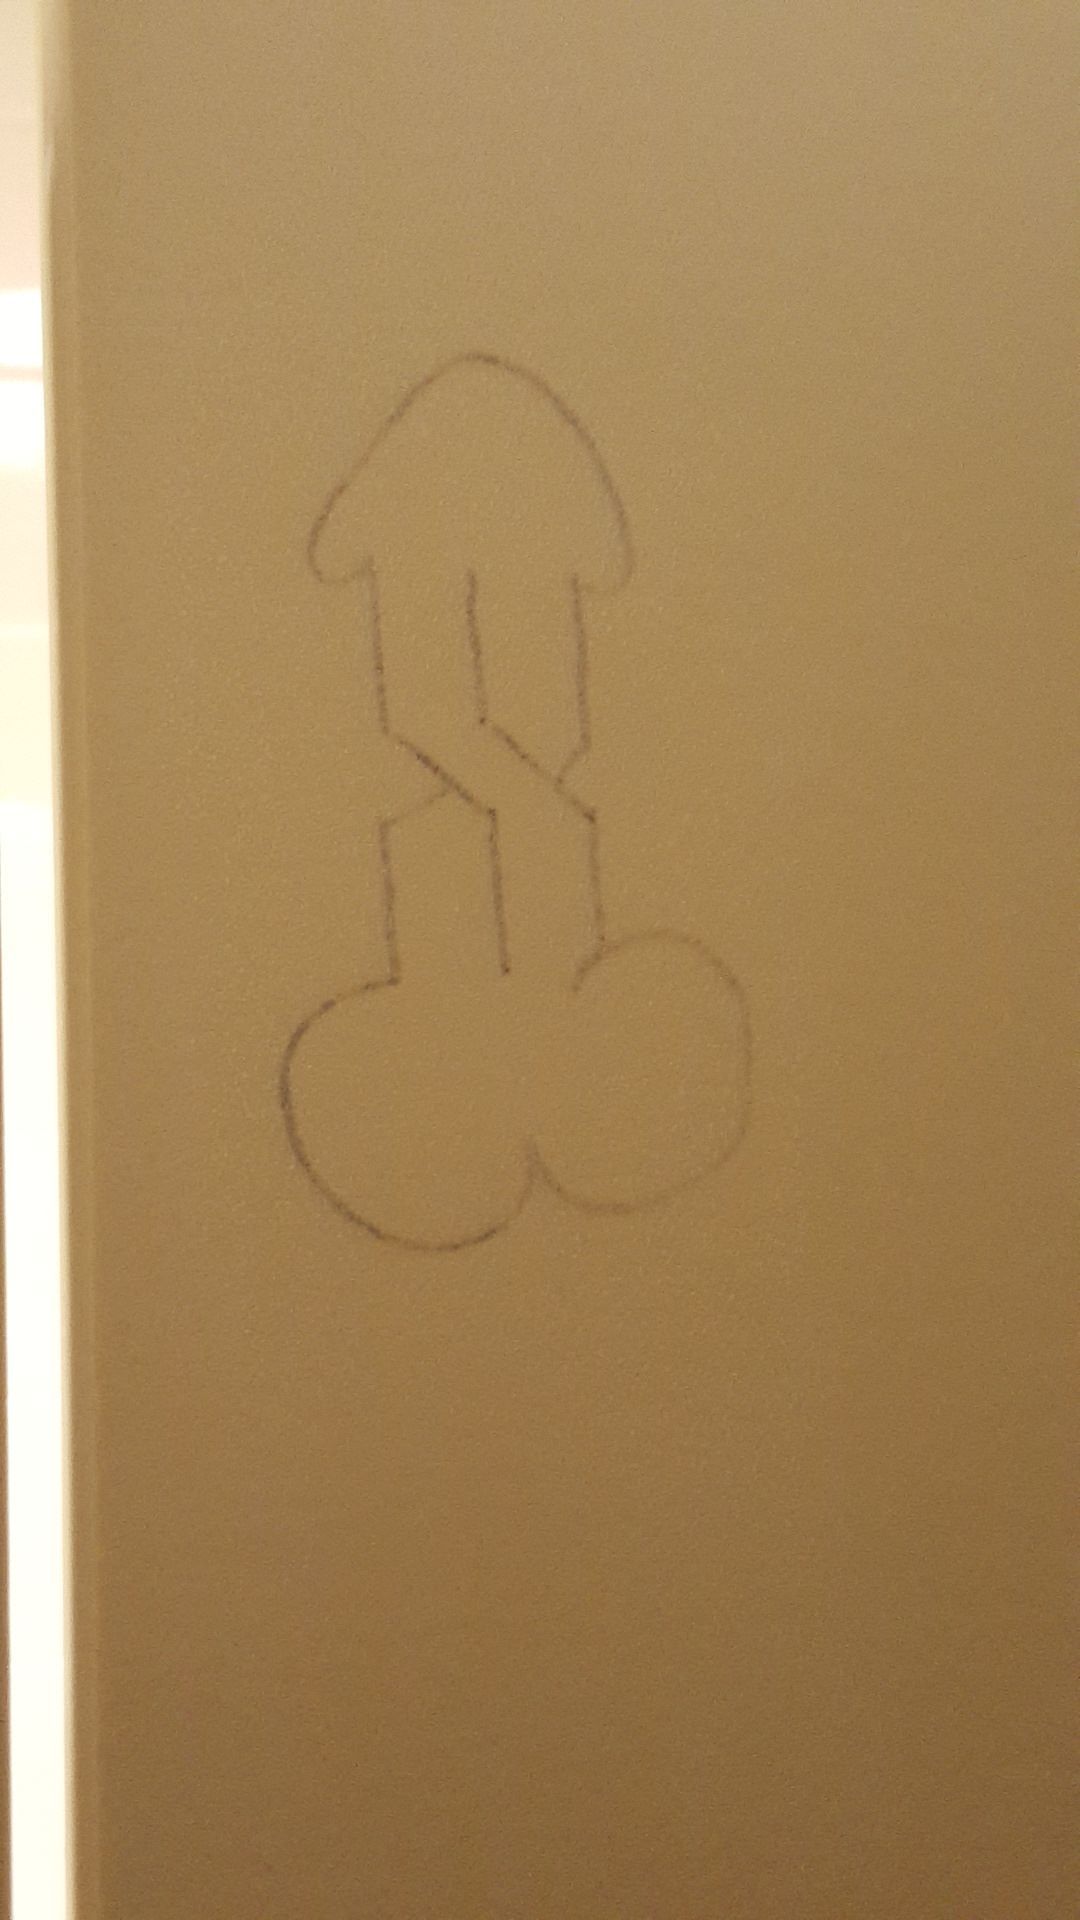 I was in a public restroom when I discovered this sacred rune...